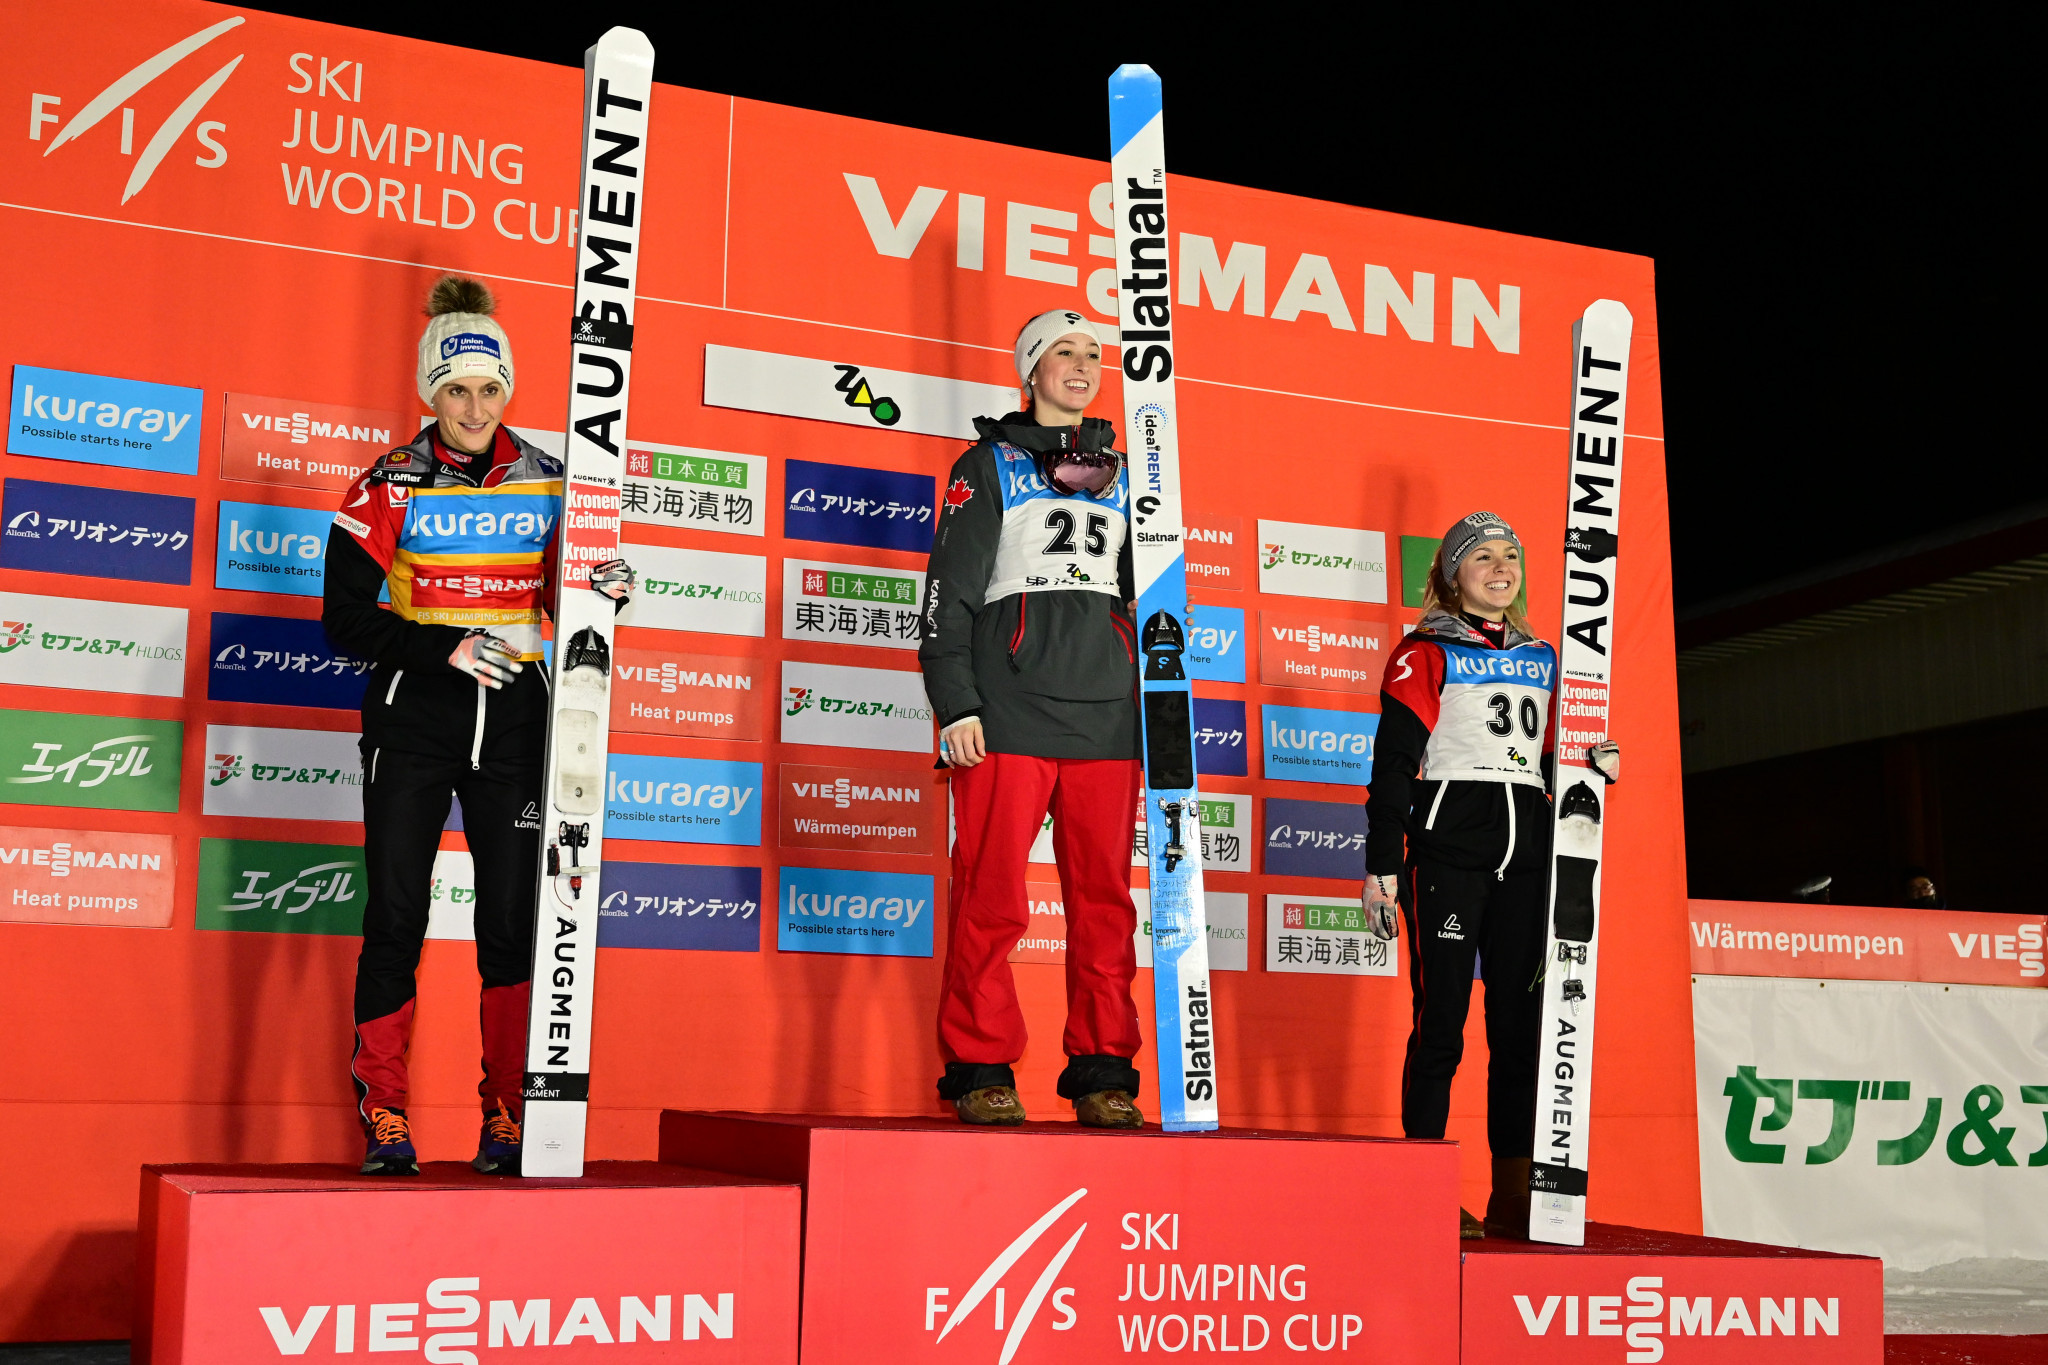 Austria's Eva Pinkelnig, left, continues to lead the overall women's standings on the Ski Jumping World Cup after a second-place finish in Zaō ©Getty Images